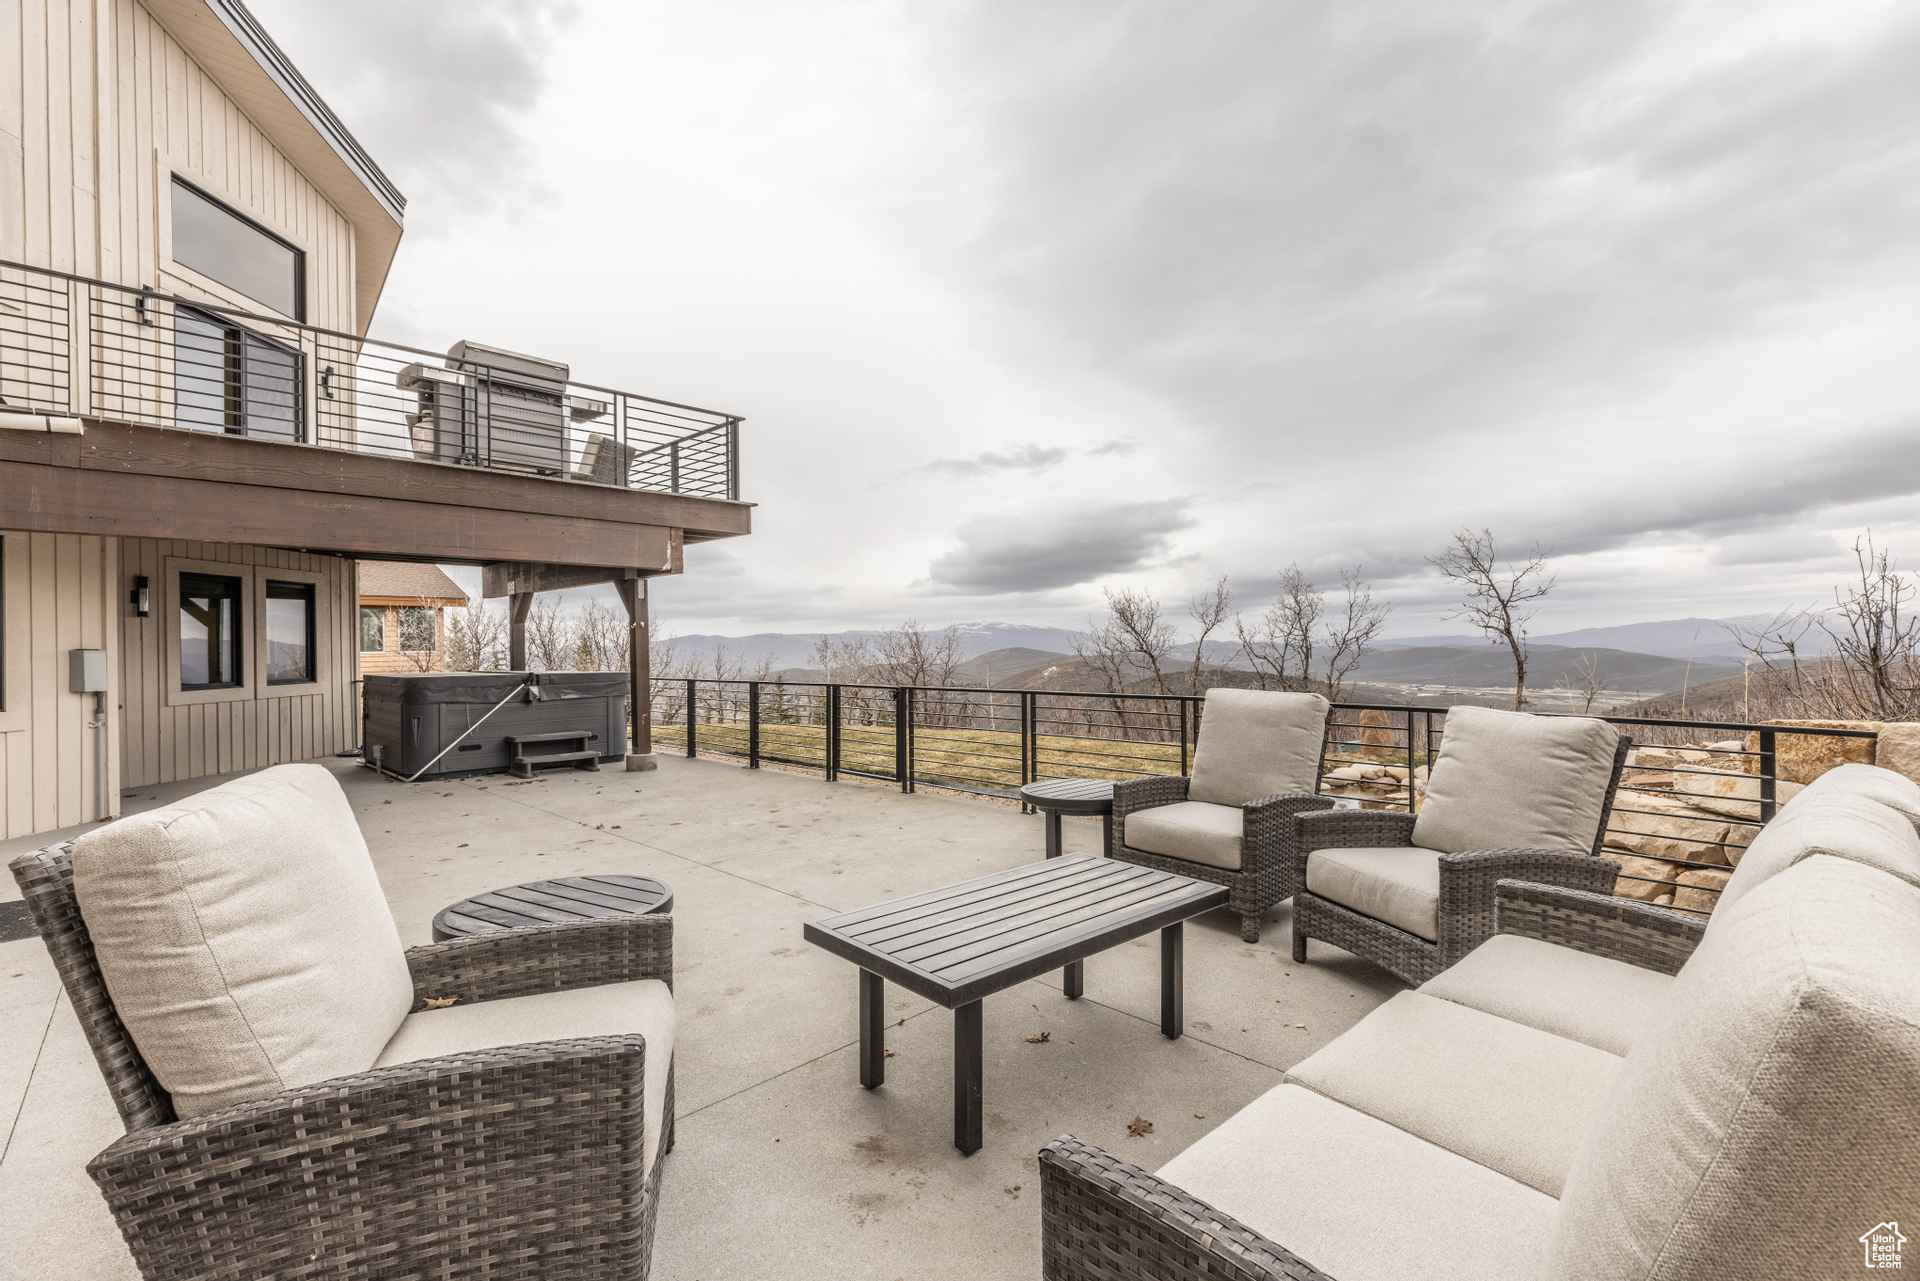 View of patio / terrace with outdoor lounge area, a mountain view, and a balcony